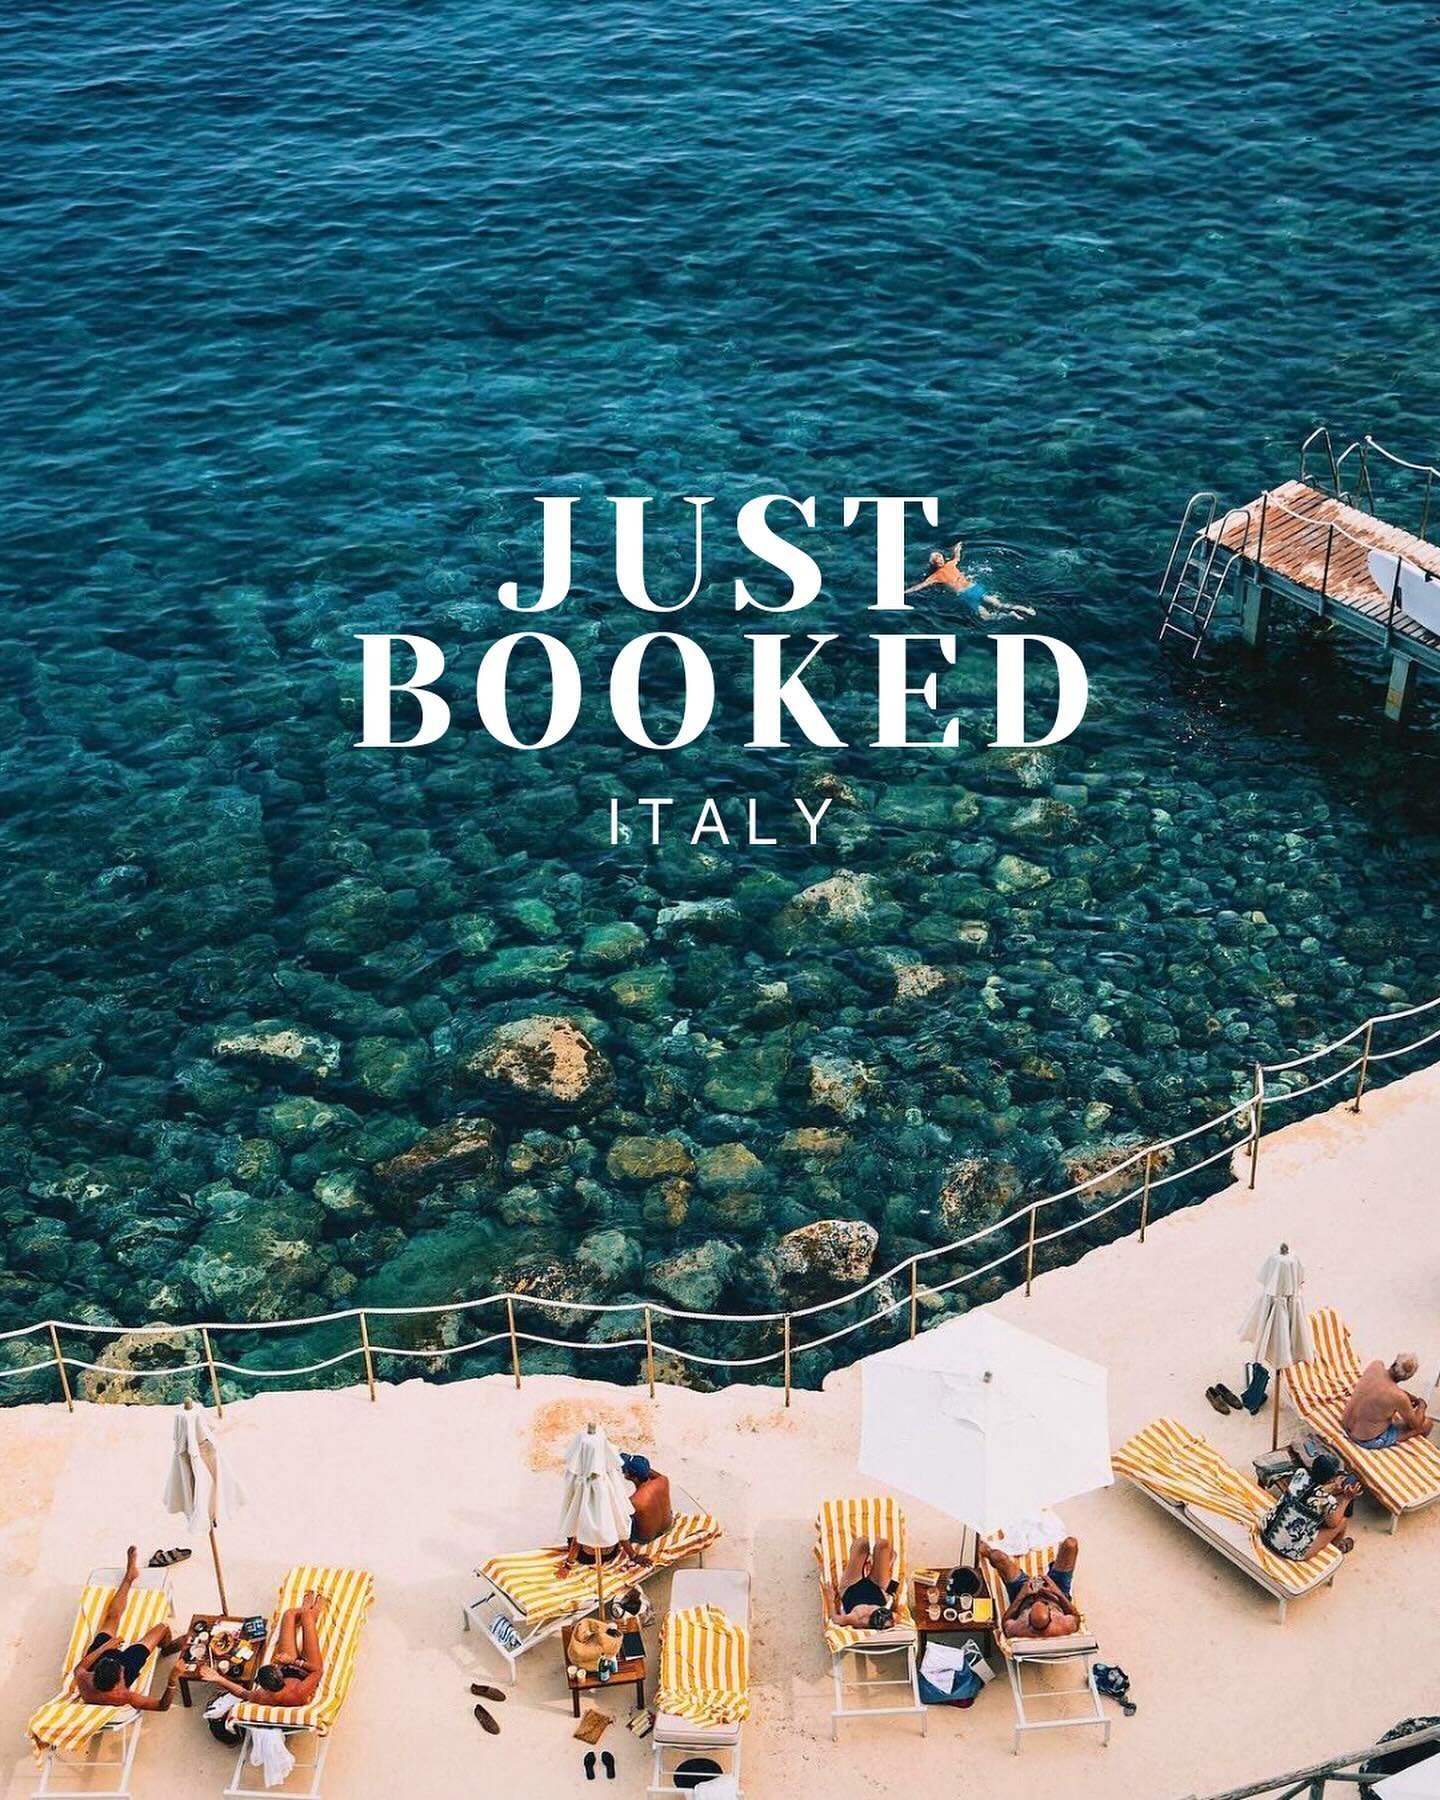 ⚡️just booked⚡️

Never have I ever wanted to hop in a client&rsquo;s suitcase so badly! My clients have just booked an epic two week trip to Italy starting with 3 nights in Rome at the @palazzoripettarome, before moving to @hotelilpellicano for a rel